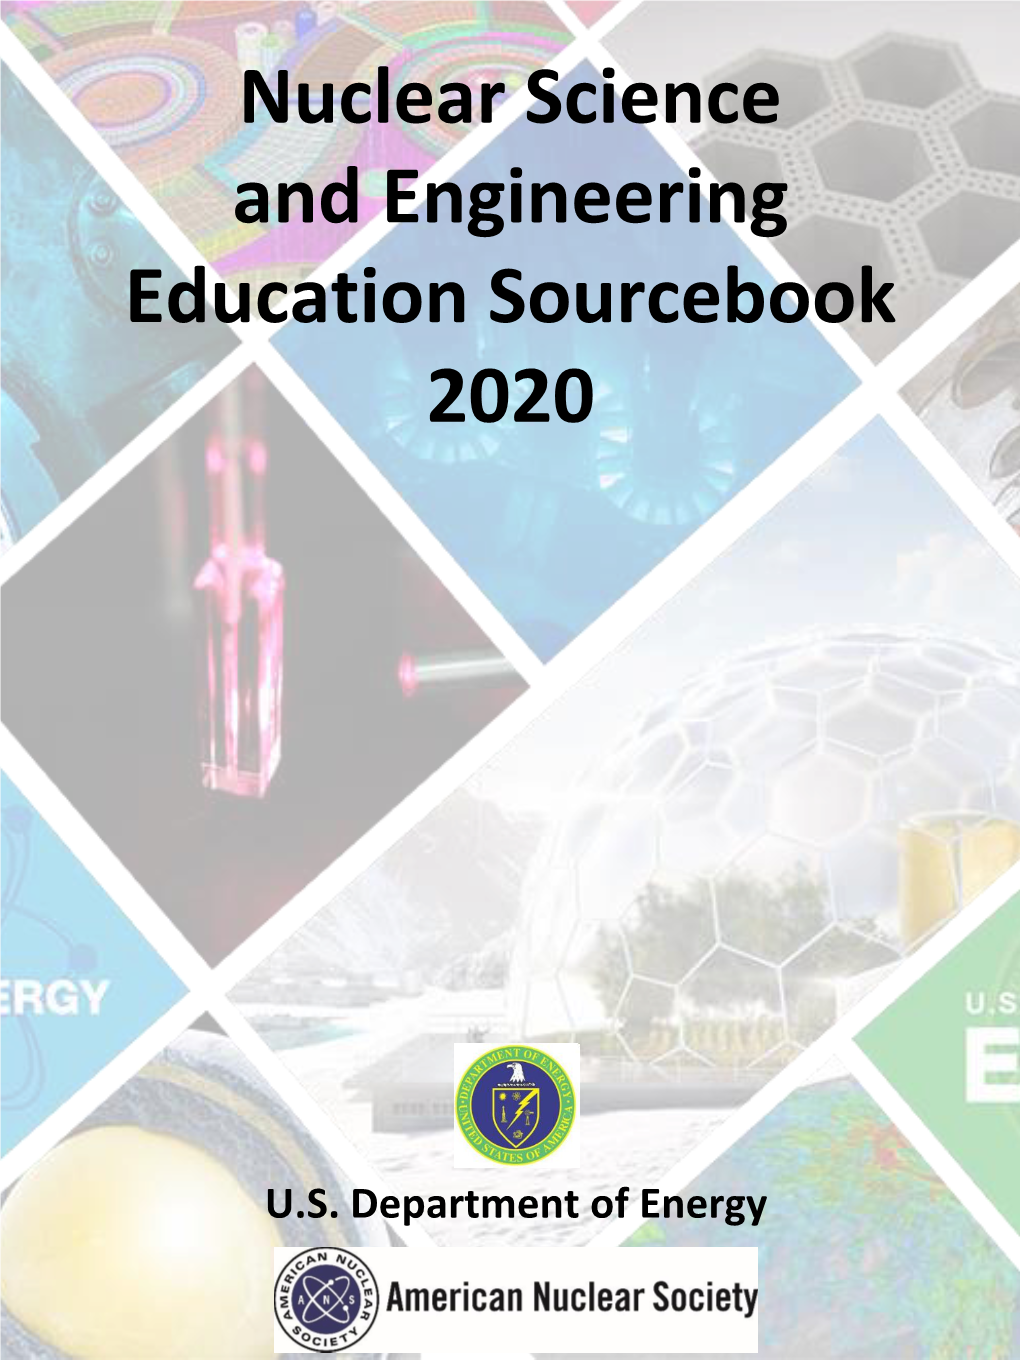 Nuclear Science and Engineering Education Sourcebook 2020